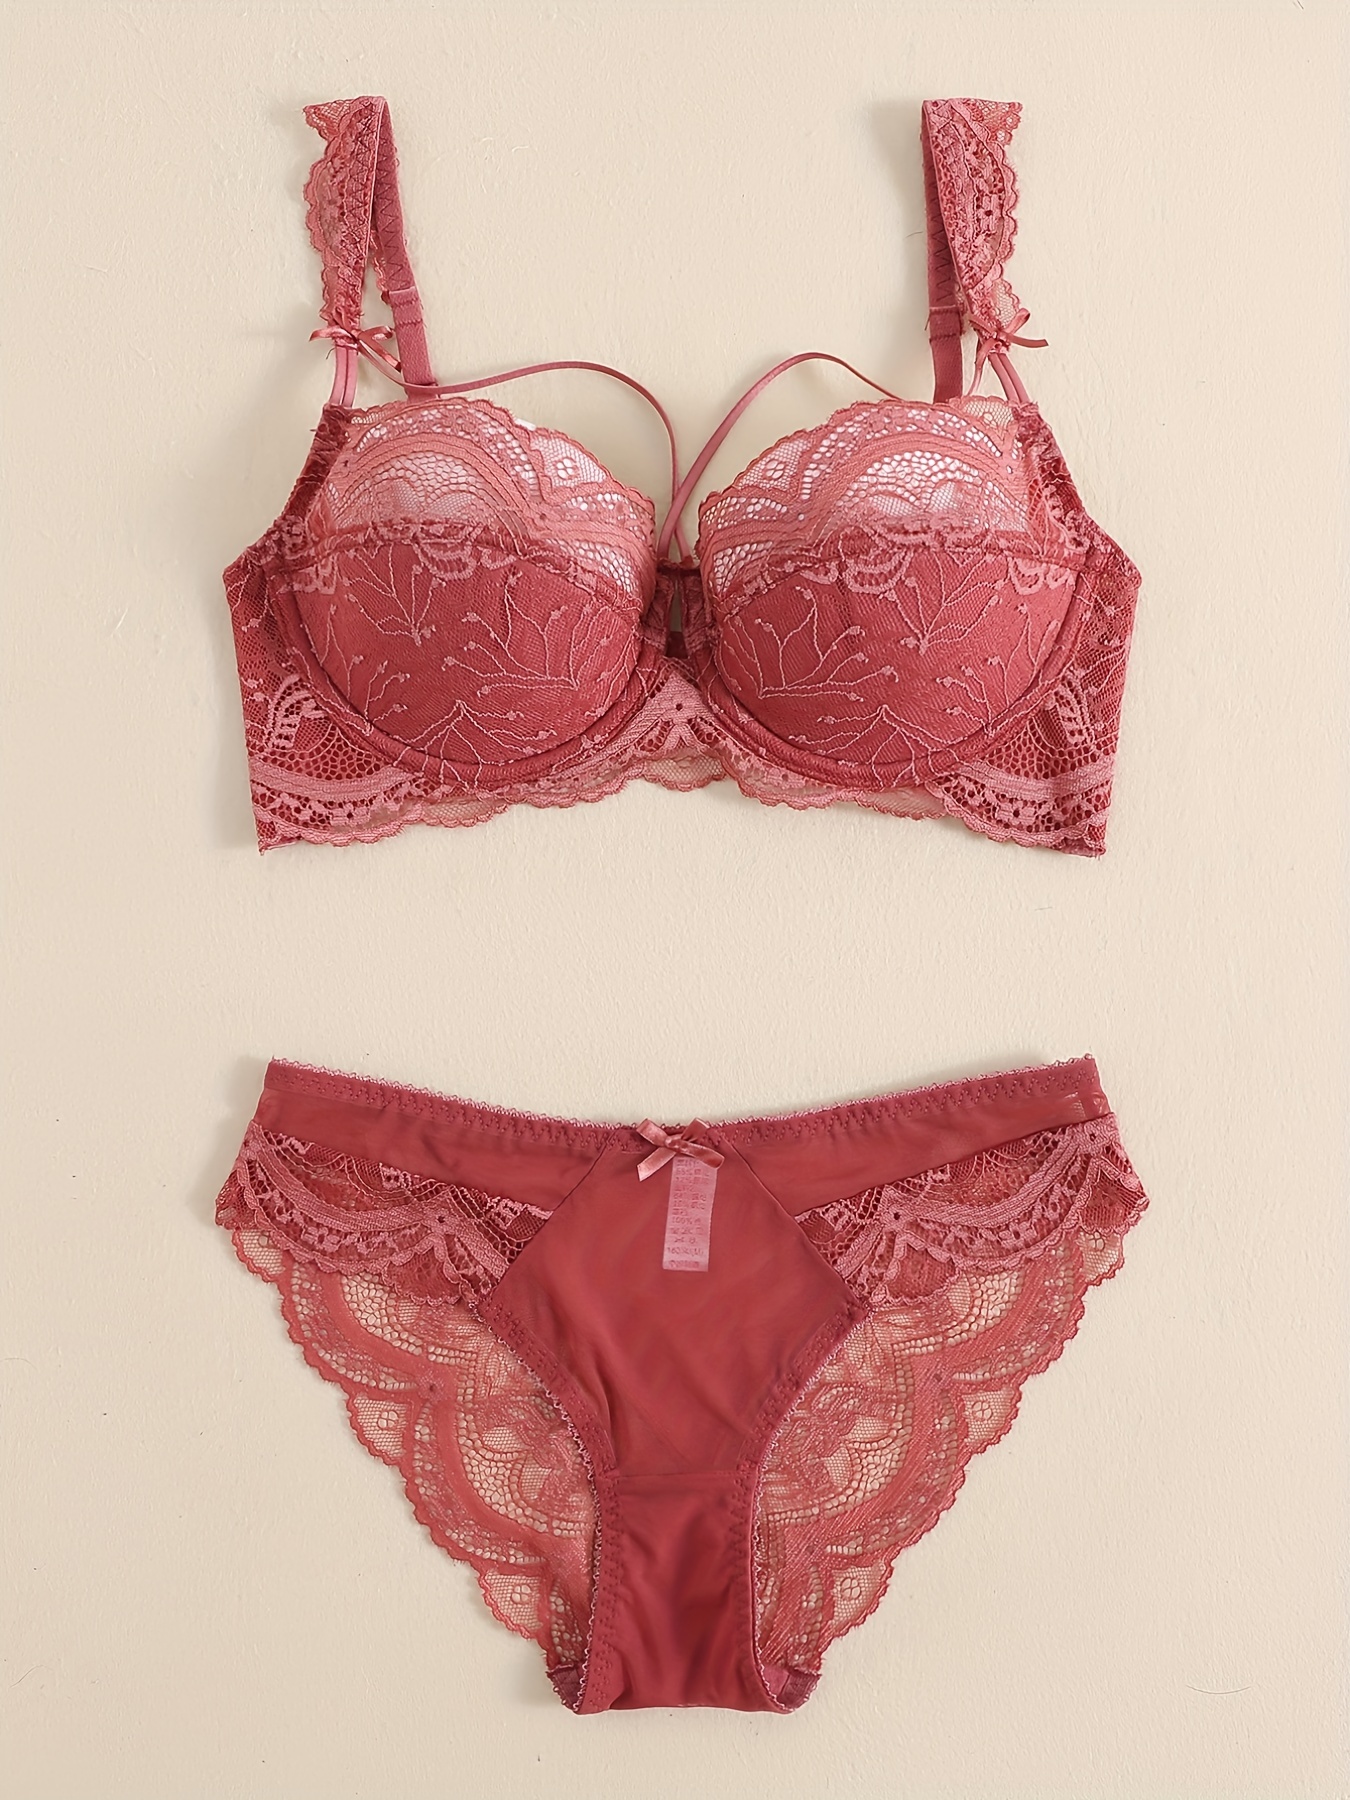 Red Lace Underwear Seamless Push Up Bra and Panty Set for Women